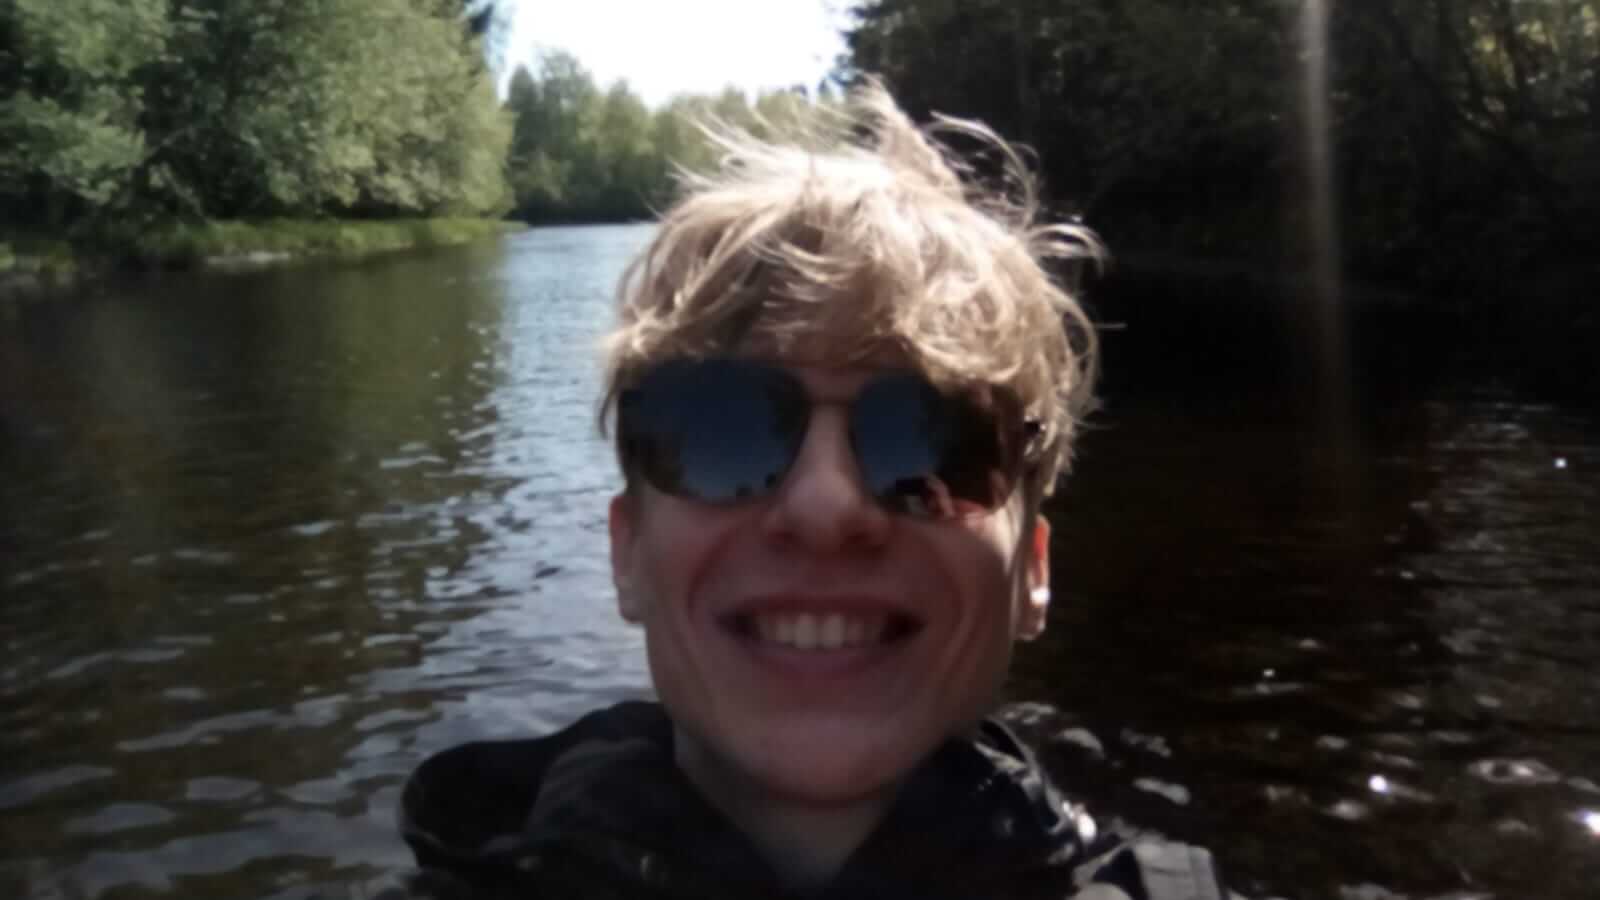 My selfie as I'm kayaking. Only my head is shown, I'm grinning widely with my teeth showing. Behind me is water and trees. My face is not focused properly which makes the photo silly.